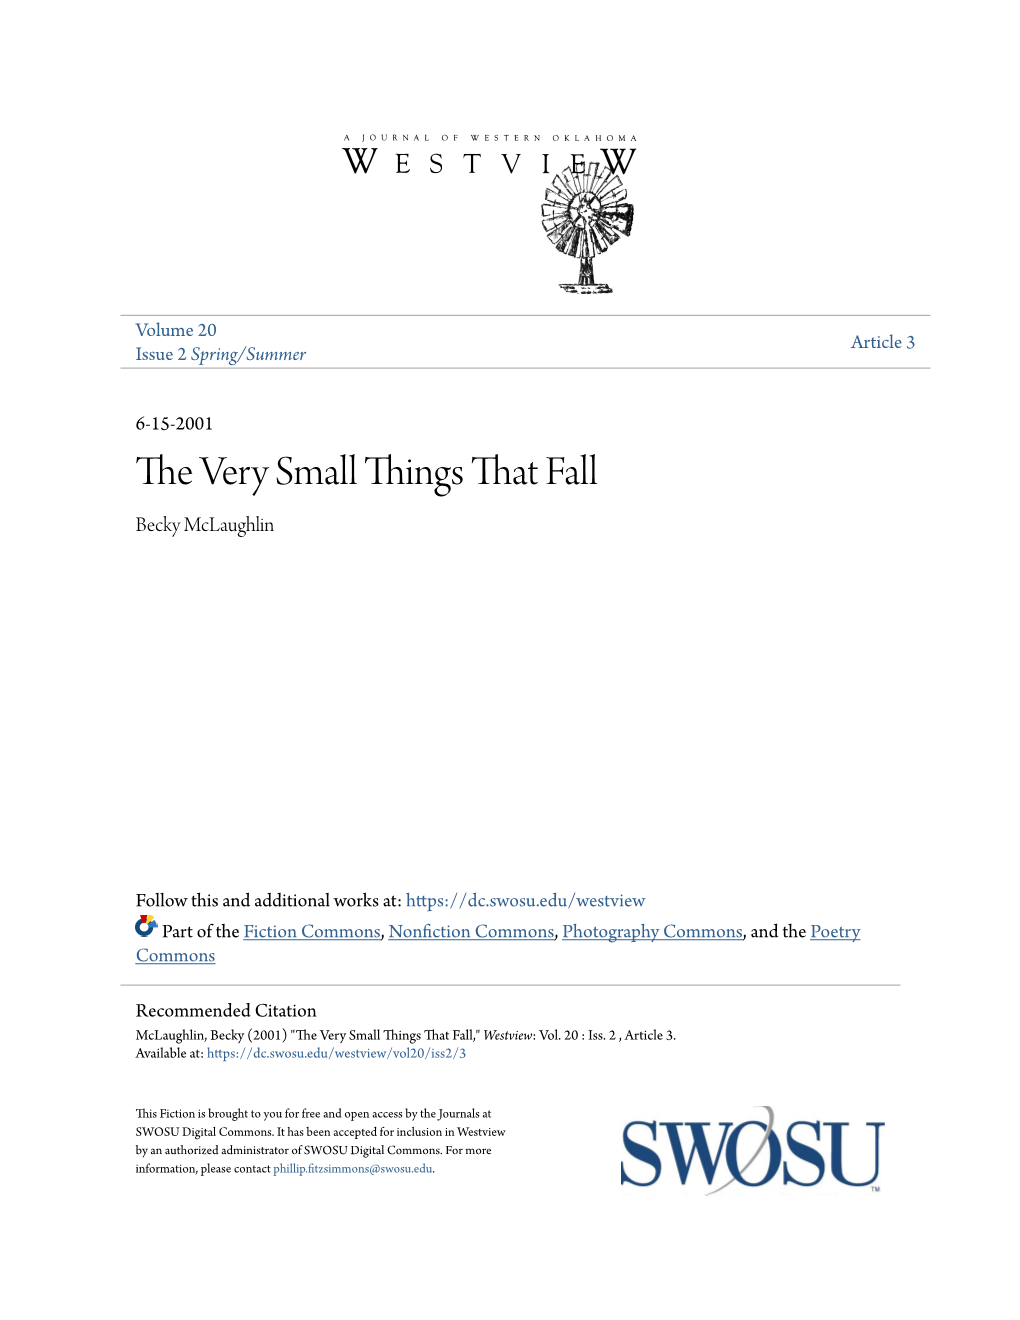 The Very Small Things That Fall